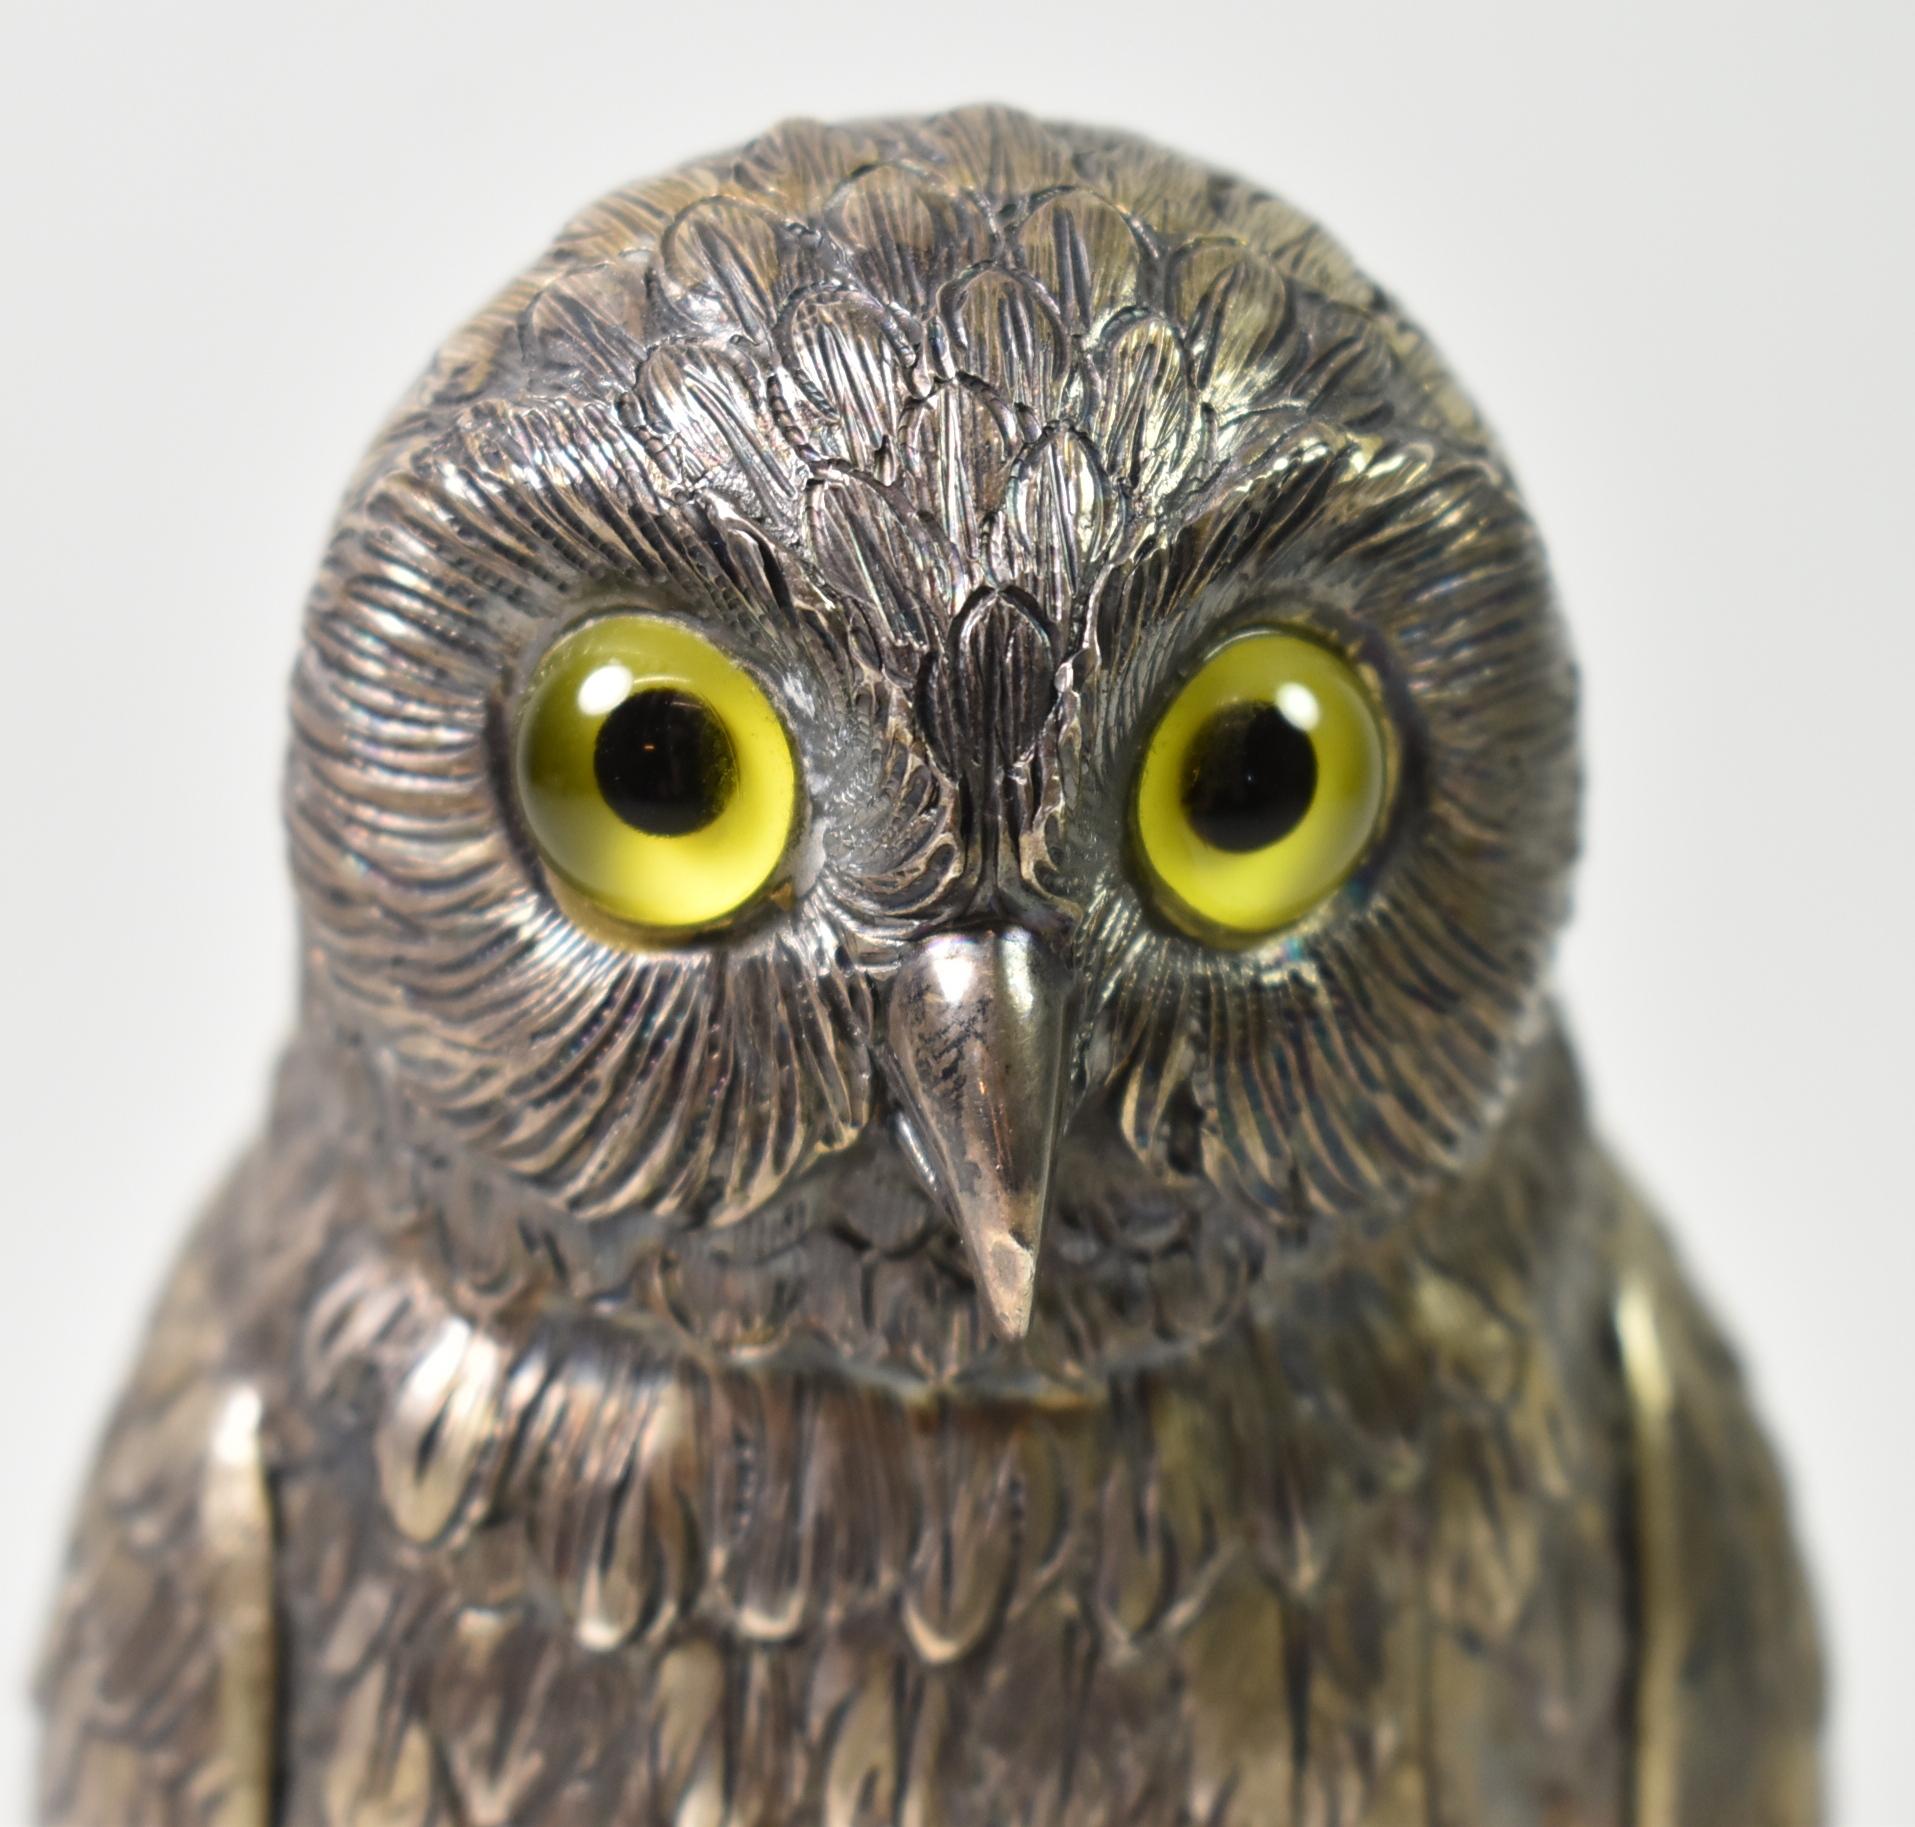 Antique German Sterling silver owl sculpture with glass eyes from the early 1900's. Cast table ornament with fine detailing. Marked Sterling, 925, Germany on the foot. 6 3/4